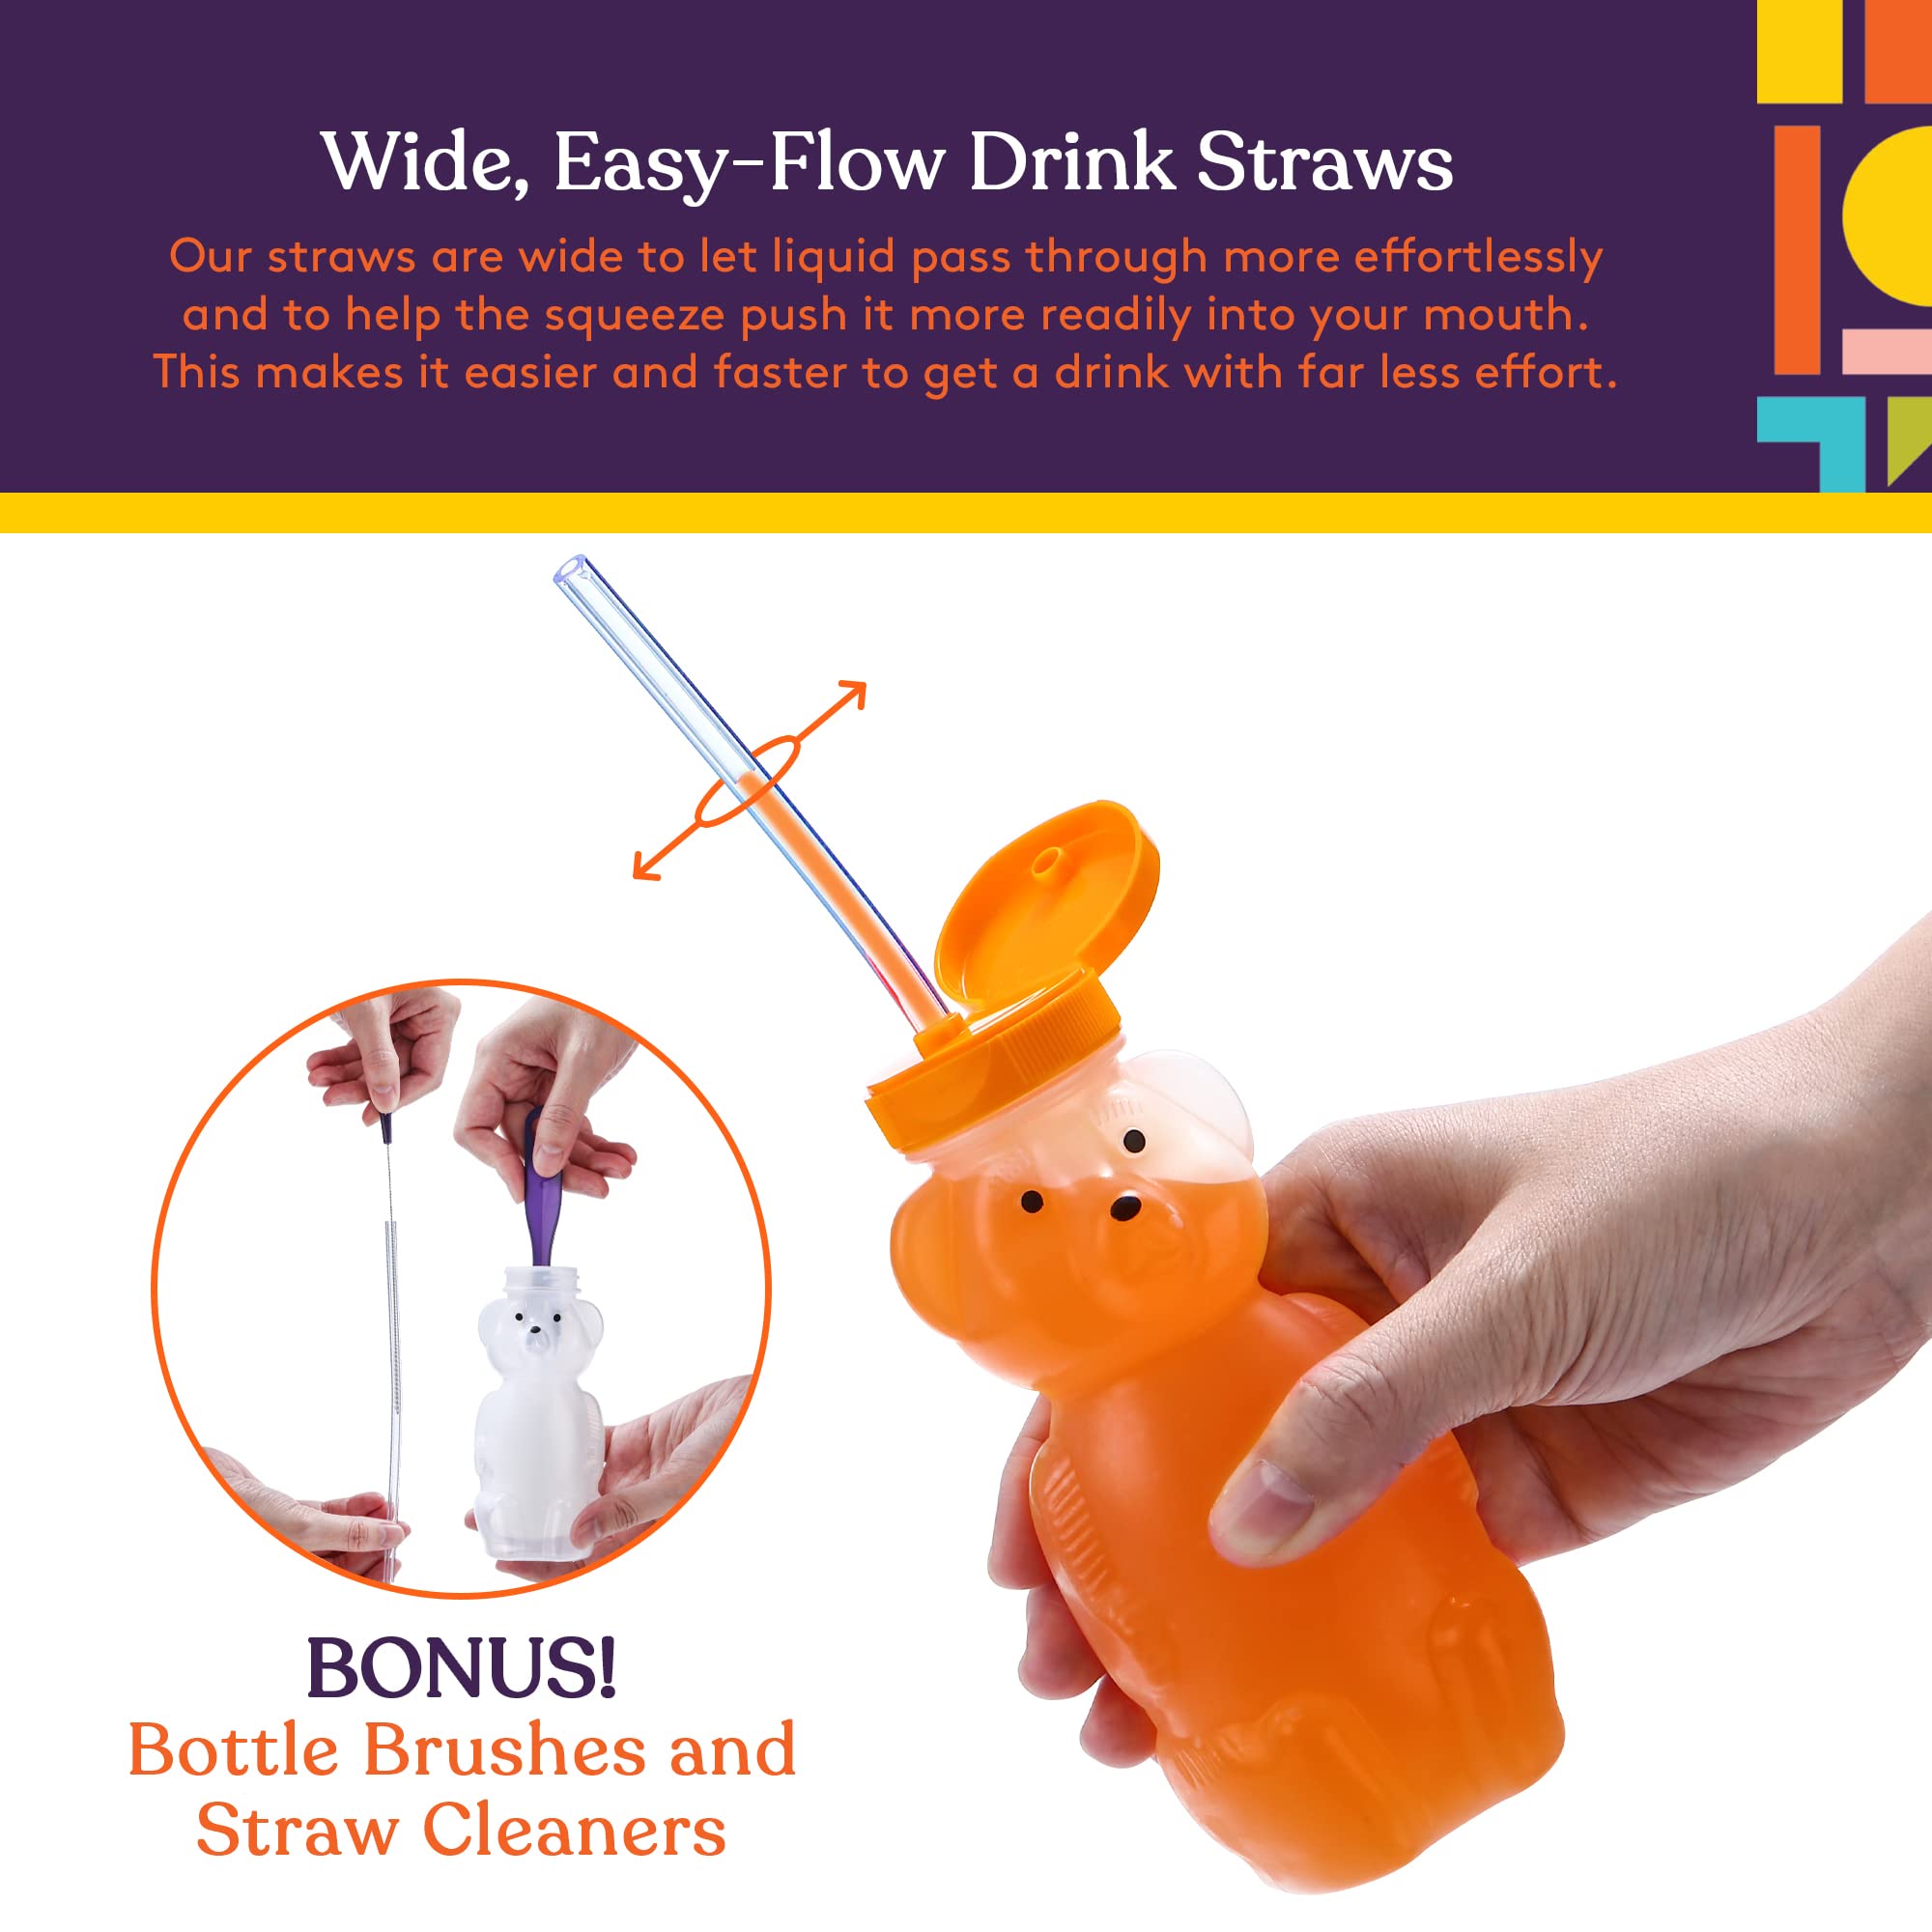 Special Supplies Honey Bear Straw Cup Long Straws, 3-Pack Squeezable Therapy and Special Needs Assistive Drink Container, Spill Proof and Leak Resistant Lid